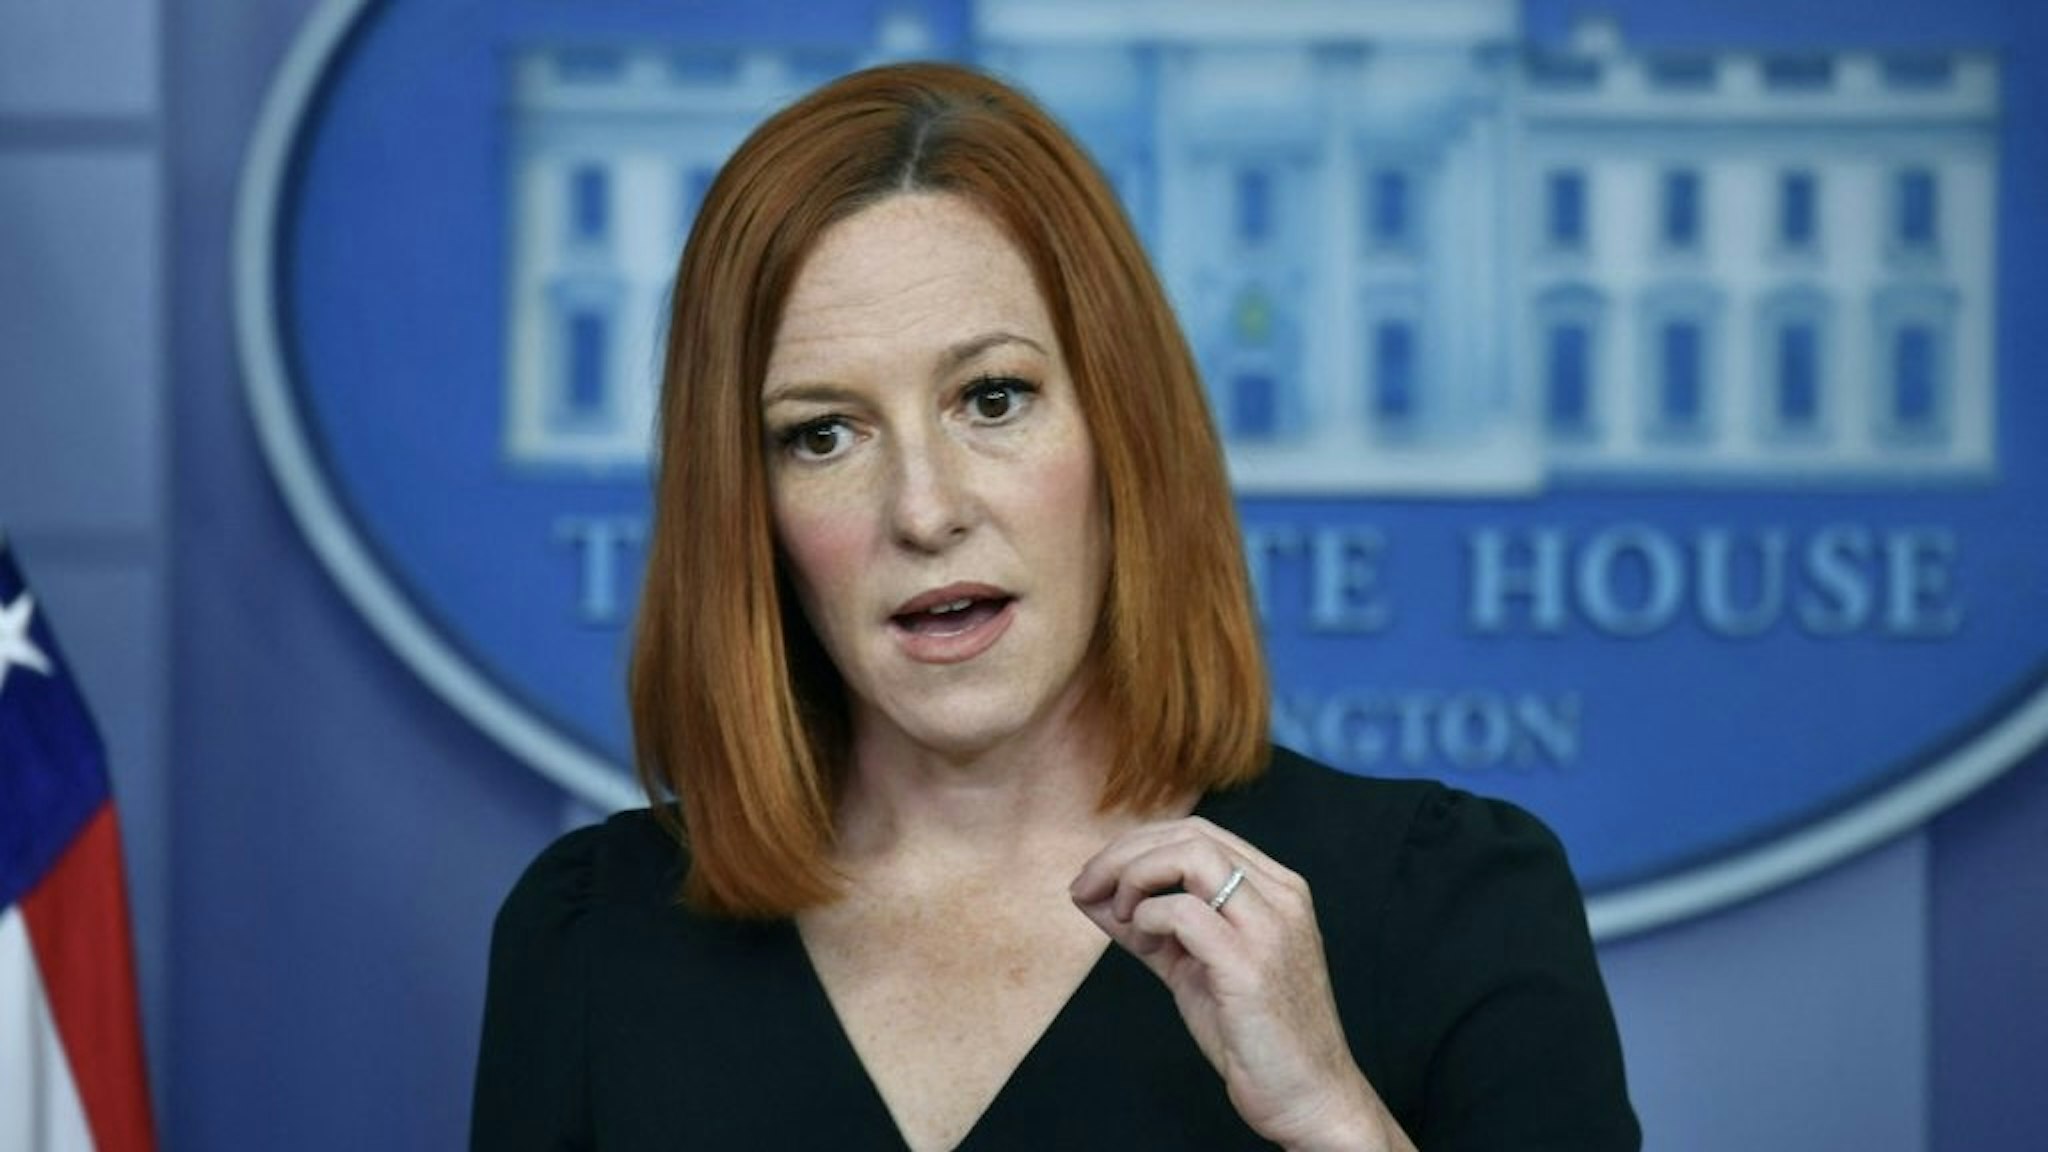 White House Press Secretary Jen Psaki speaks during the daily press briefing at the White House on May 4, 2021 in Washington, DC. (Photo by Nicholas Kamm / AFP) (Photo by NICHOLAS KAMM/AFP via Getty Images)